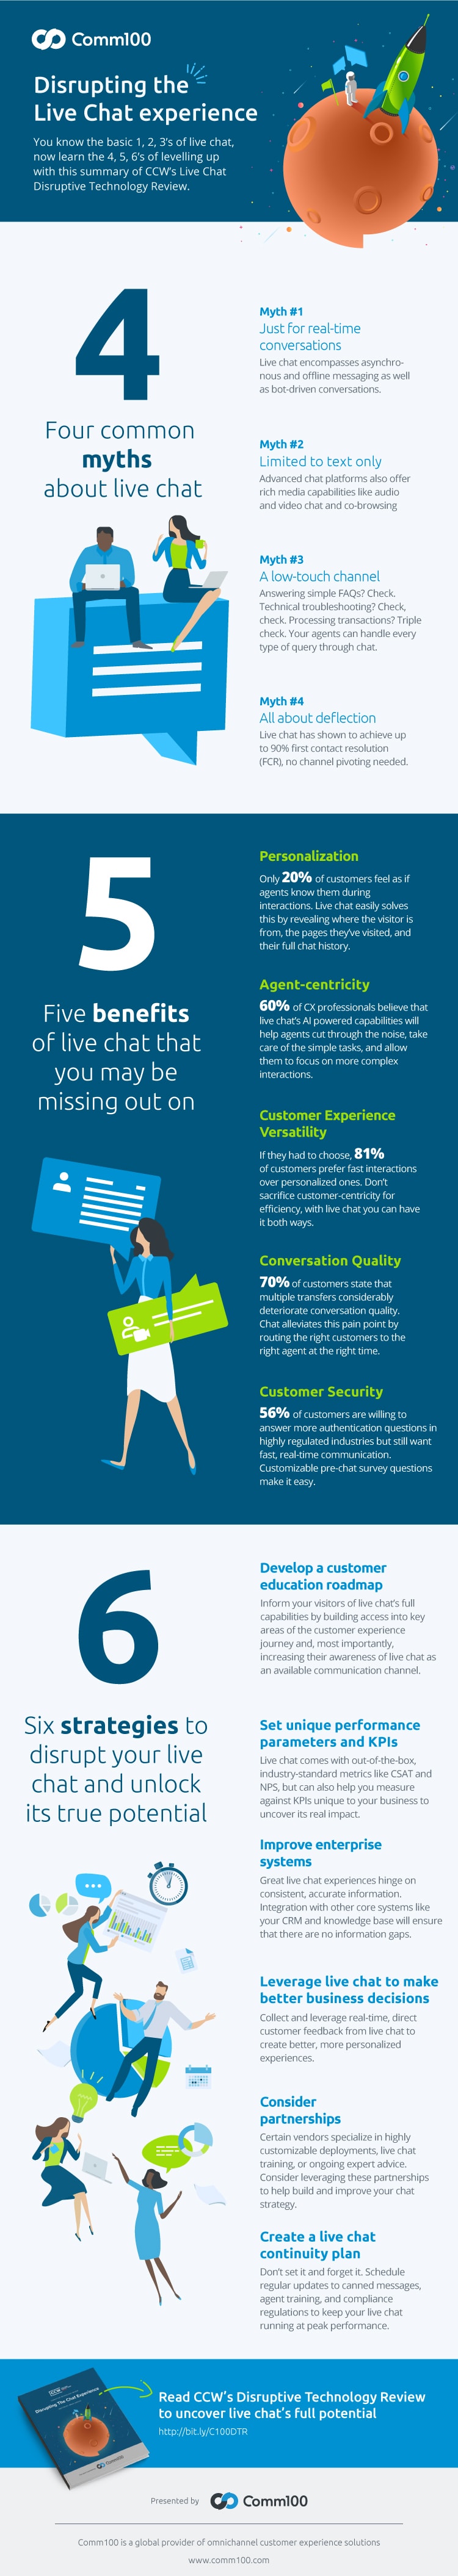 Disruptive Live Chat Experience [Infographic]